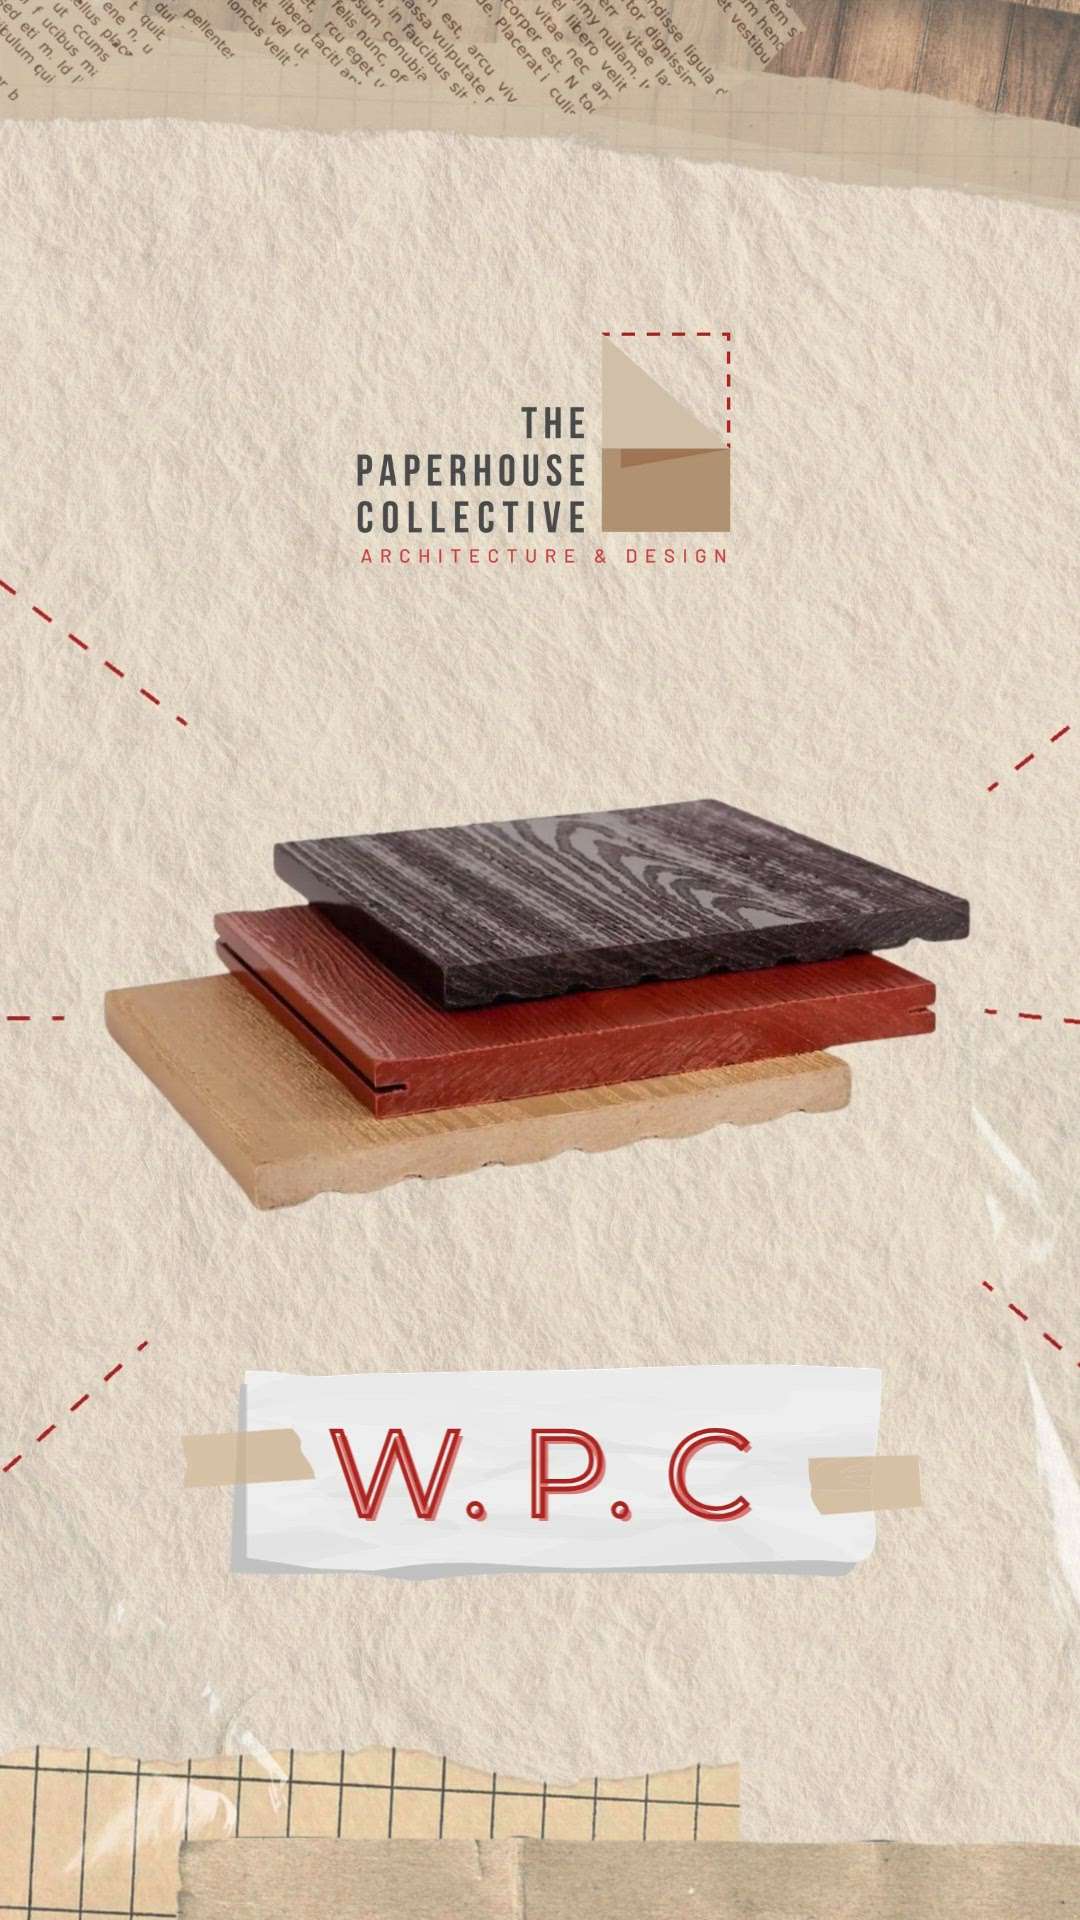 WPC (Wood plastic Composite), a truly versatile material for your interior and exterior needs and a wonderful alternative to Plywood, Wood and MDF. 

Tomlukes - https://koloapp.in/feeds/1663155420?title=Tom

#creatorsofkolo #kerala #tomlukes  #Interiortrends
#WPCBoards #architect #interior #exterior_Work